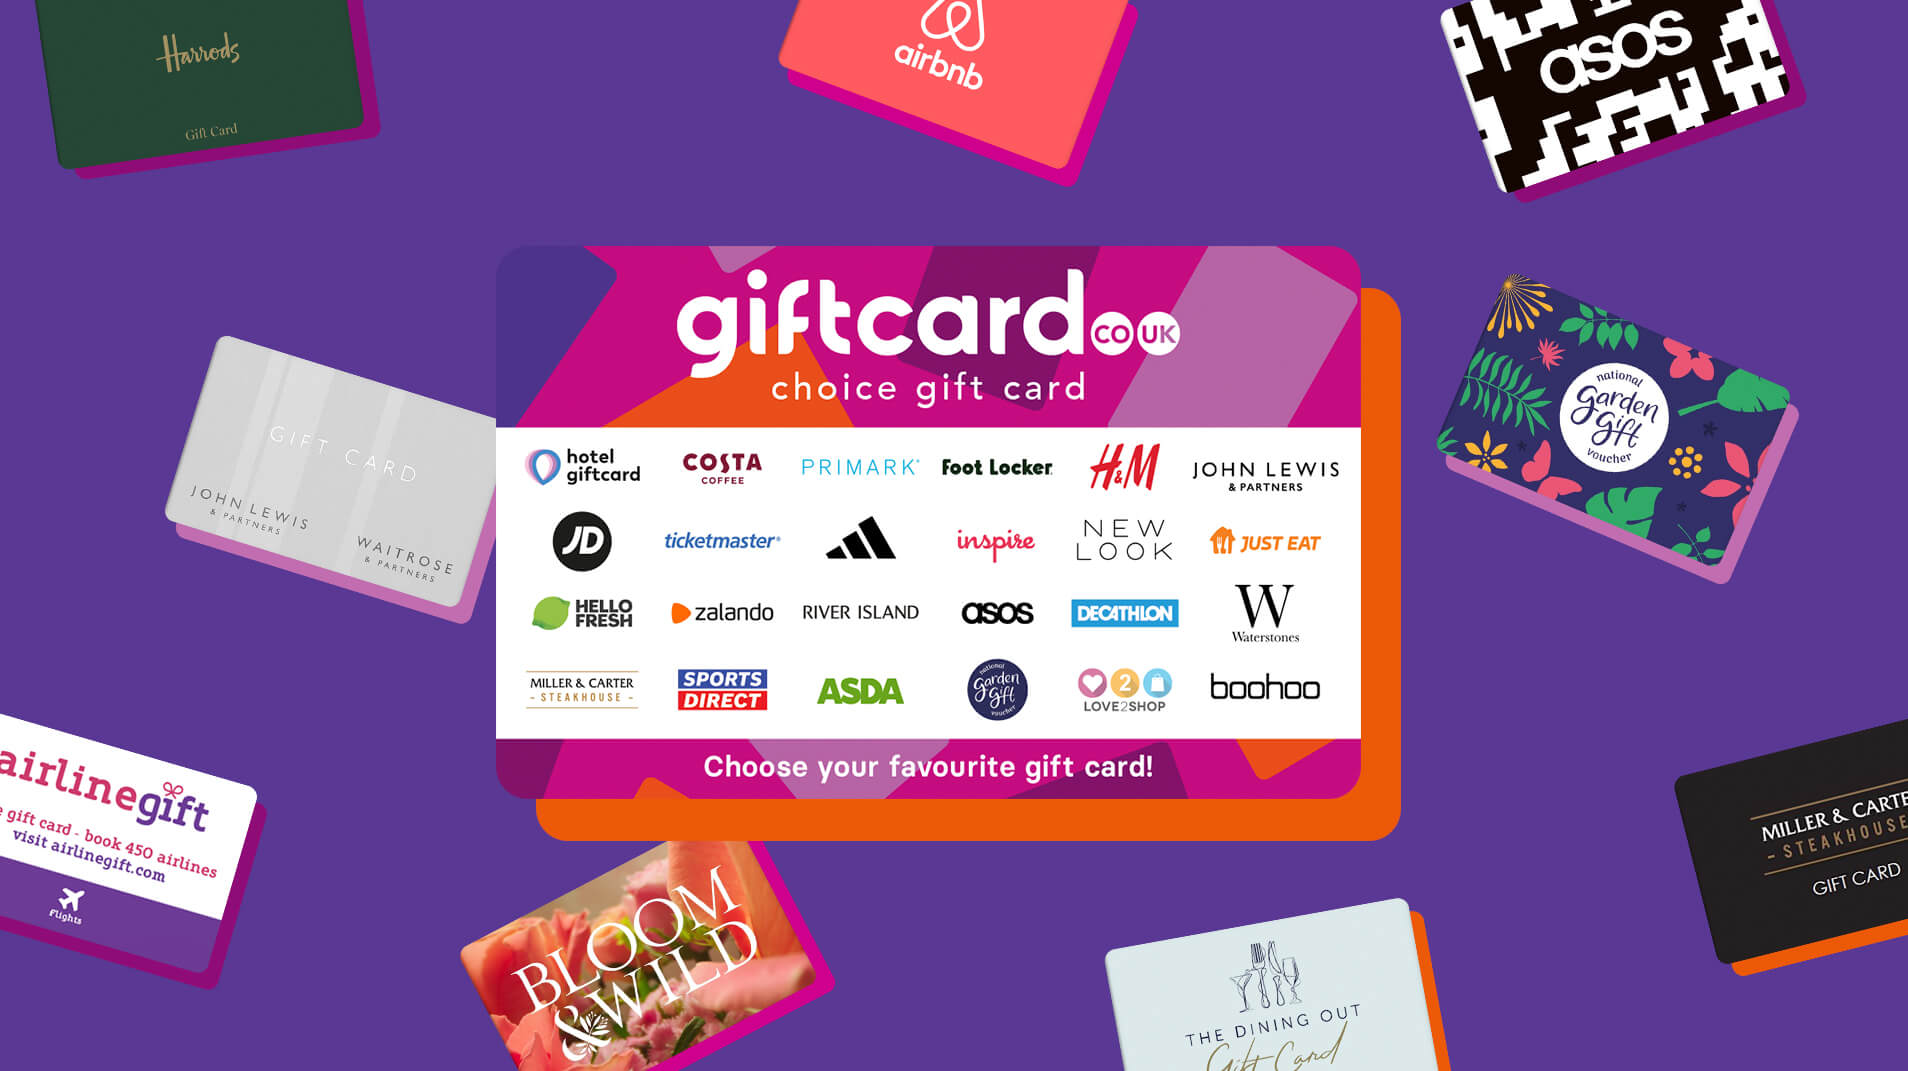 Top 10 most popular gift cards in the UK